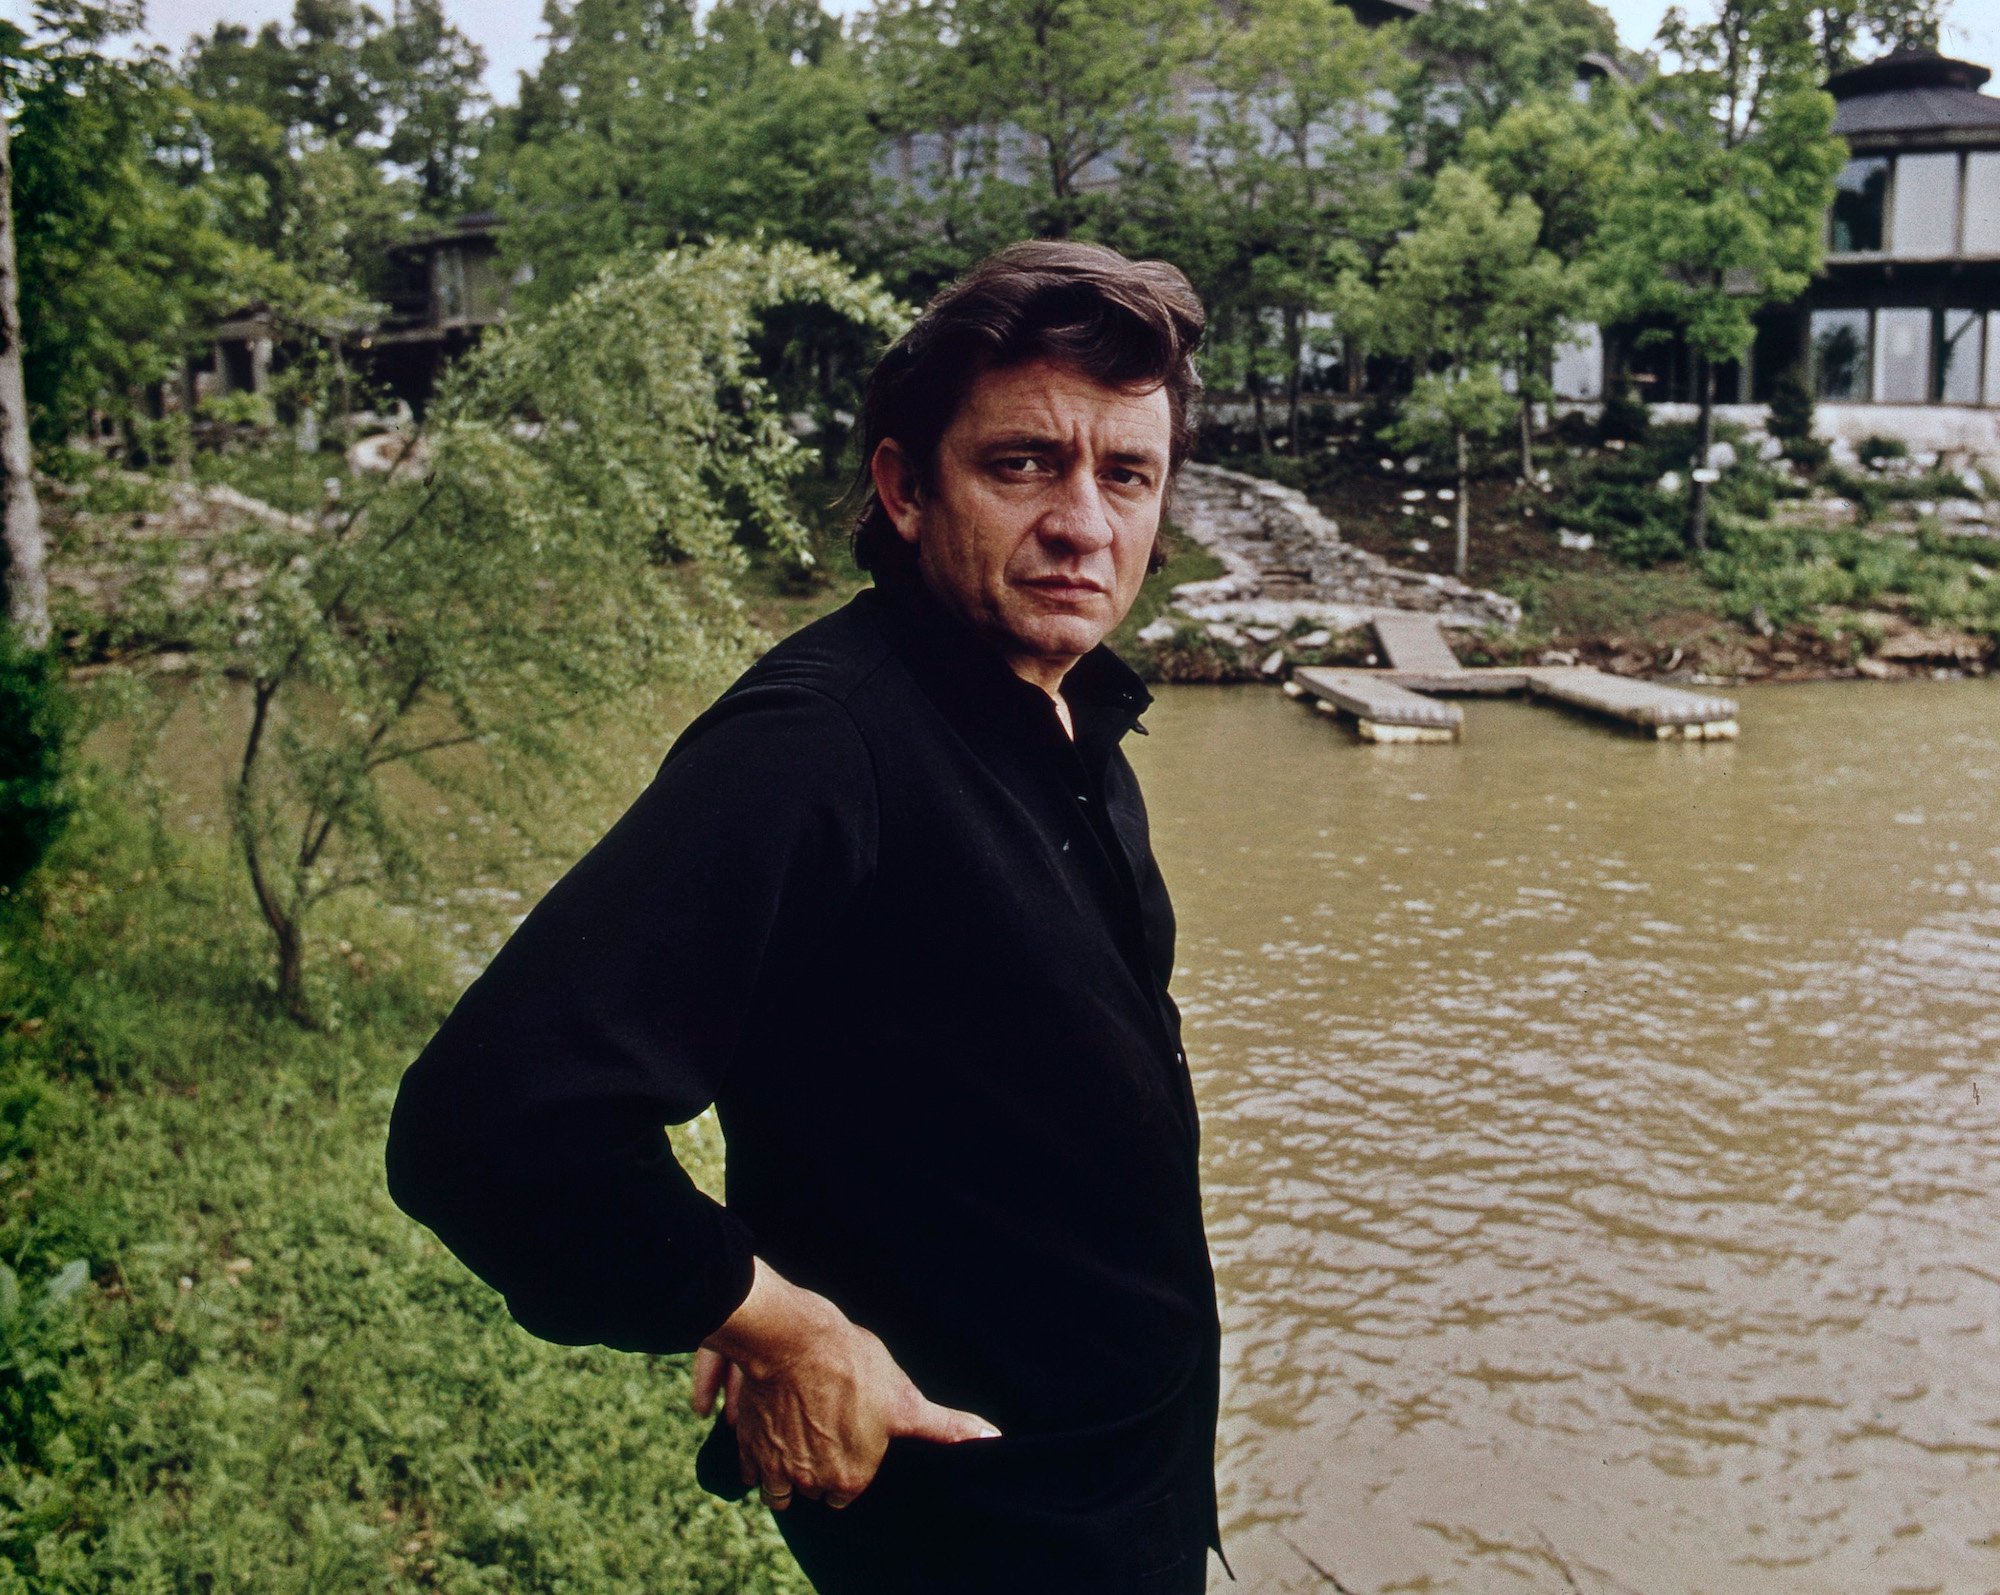 Johnny Cash standing with hands on hips, turned to the camera, in front of a watefront